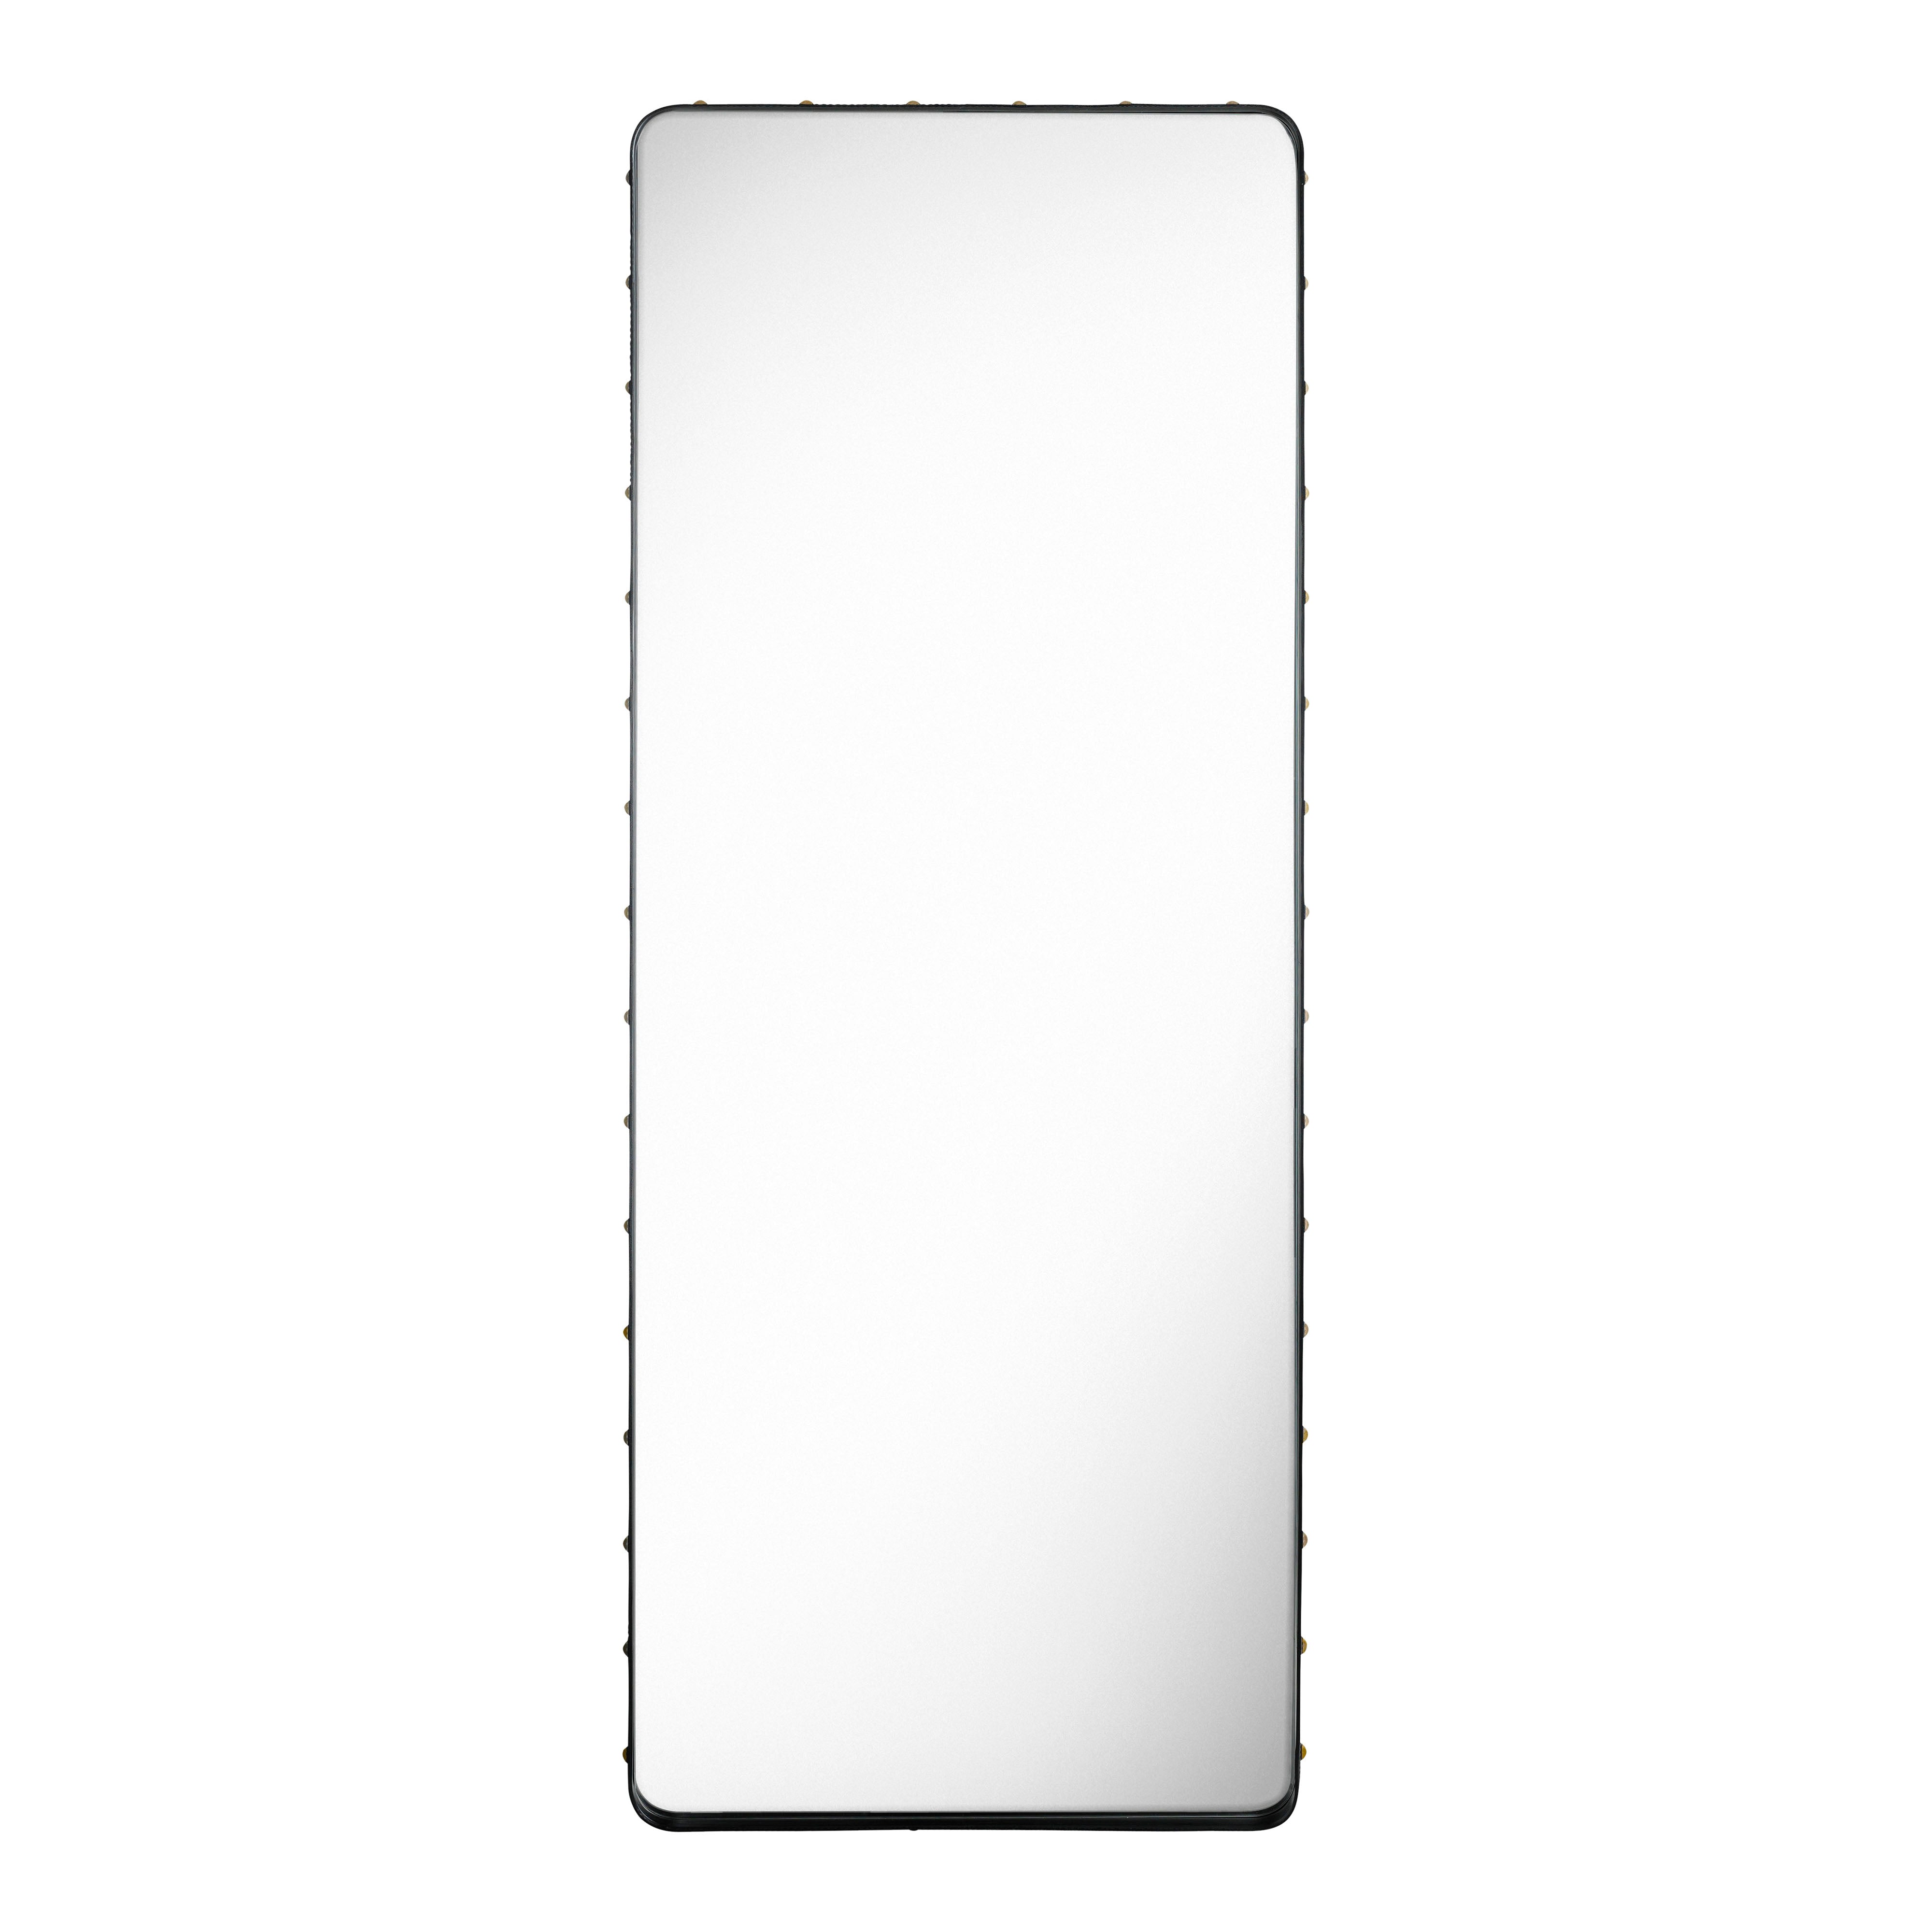 Adnet Rectangulaire Wall Mirror: Large - 70.9